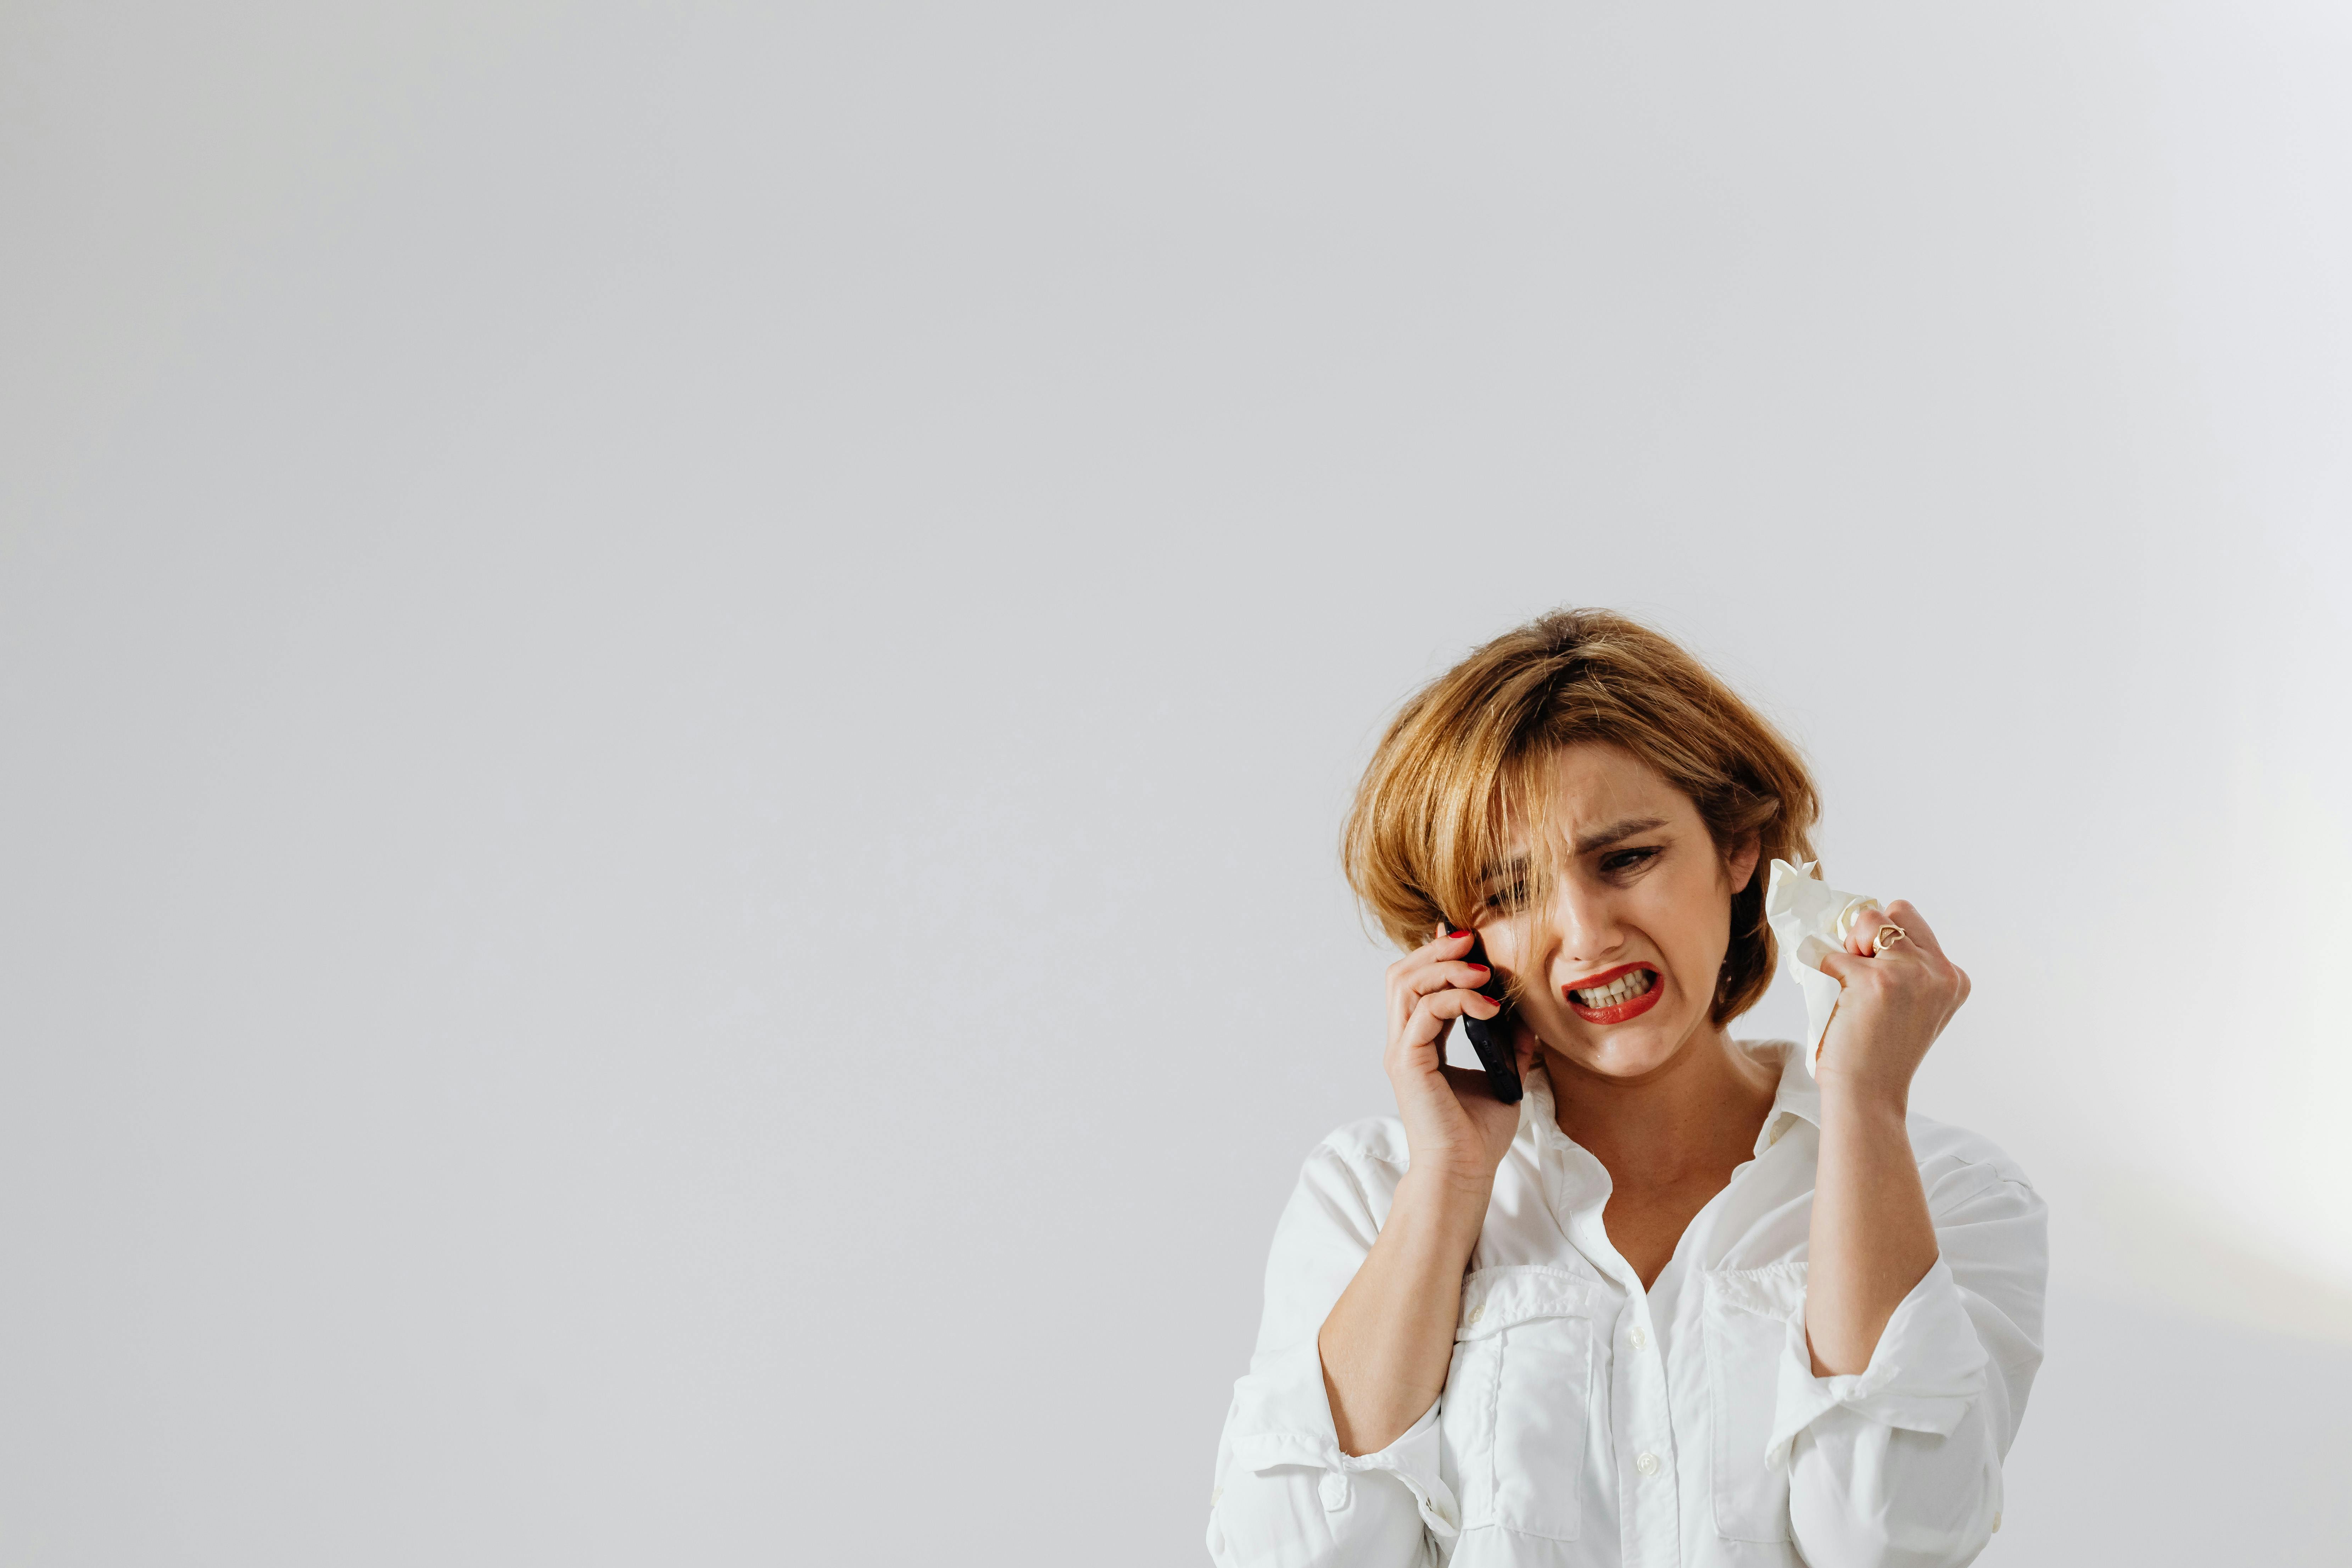 An angry woman on phone. | Source: Pexels